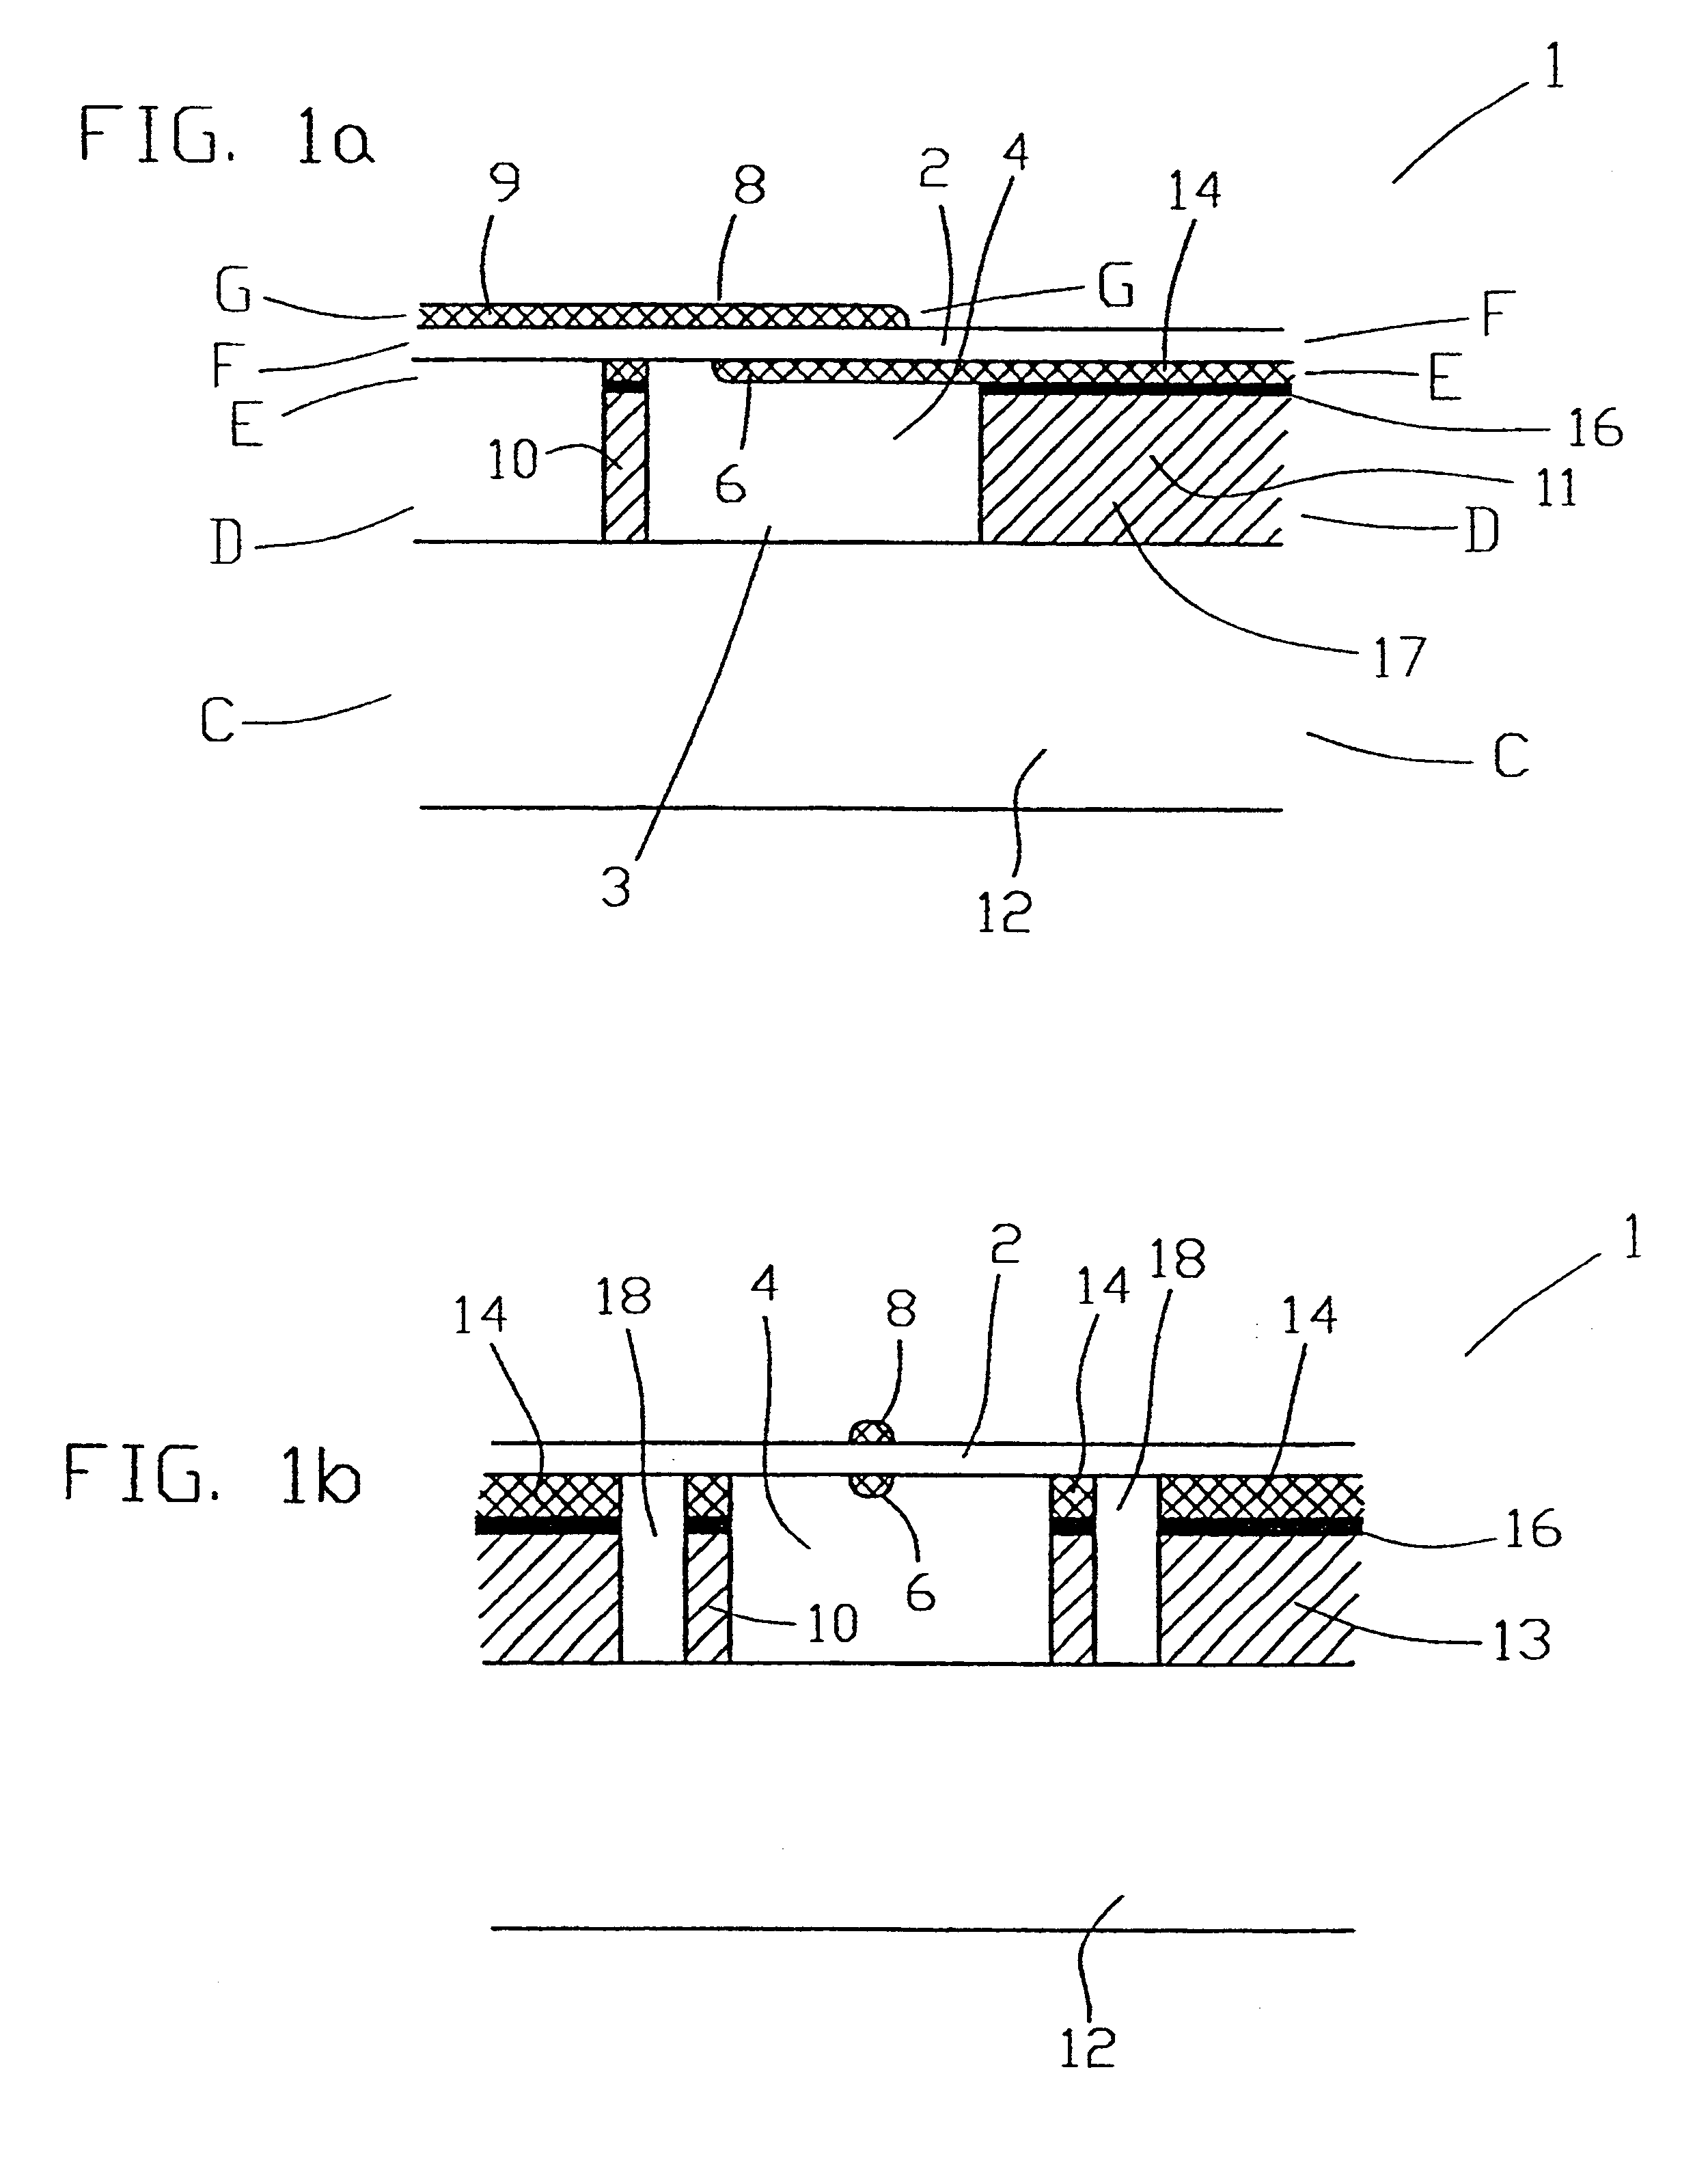 System and method for monitoring pressure, flow and constriction parameters of plumbing and blood vessels